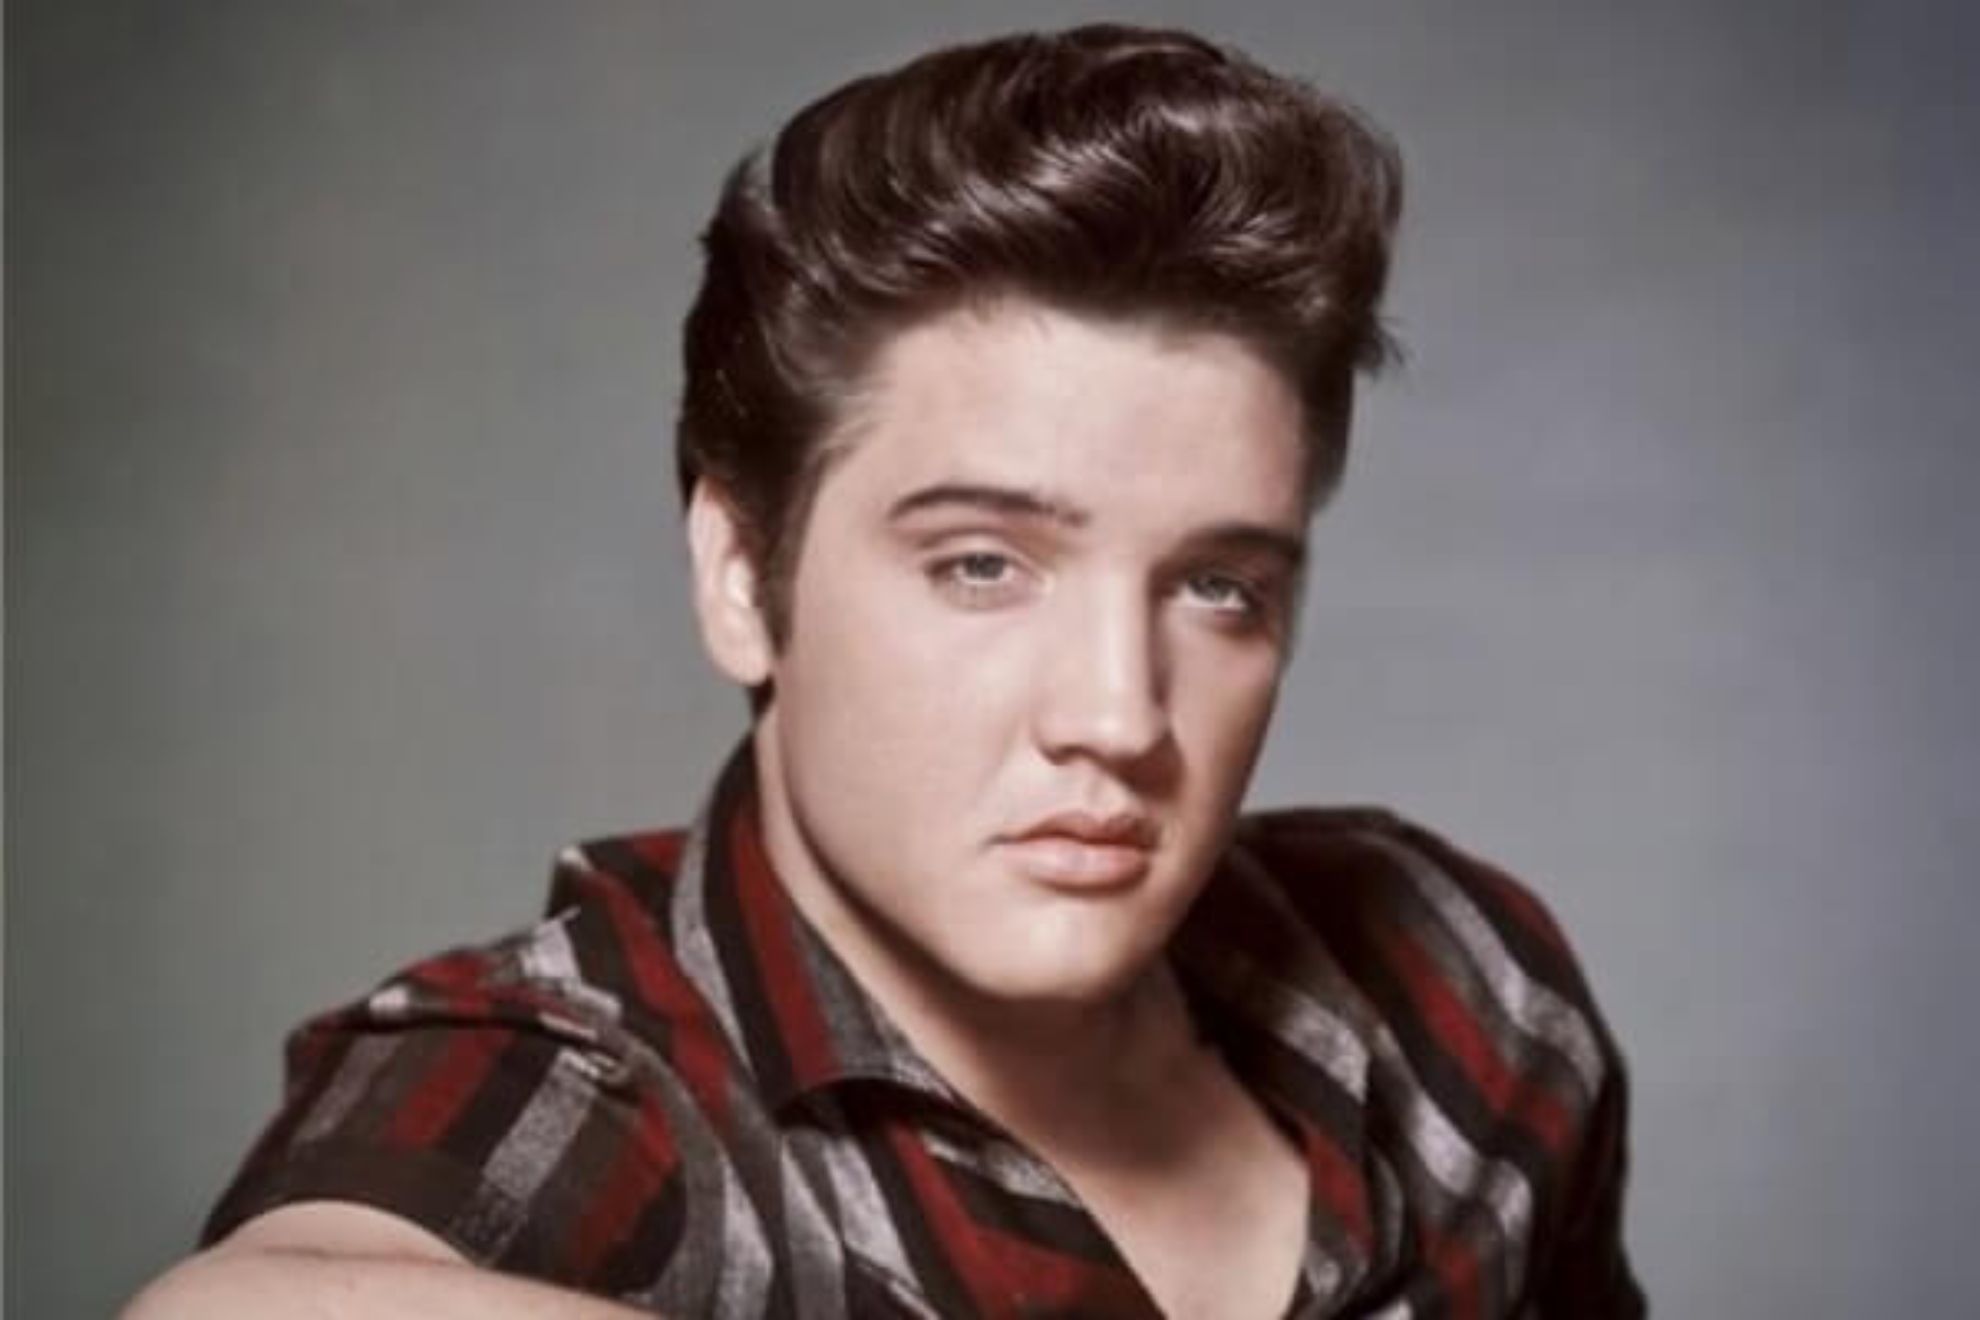 Elvis Presley and his family's 'curse': From his grandson's suicide to the death of Lisa Marie